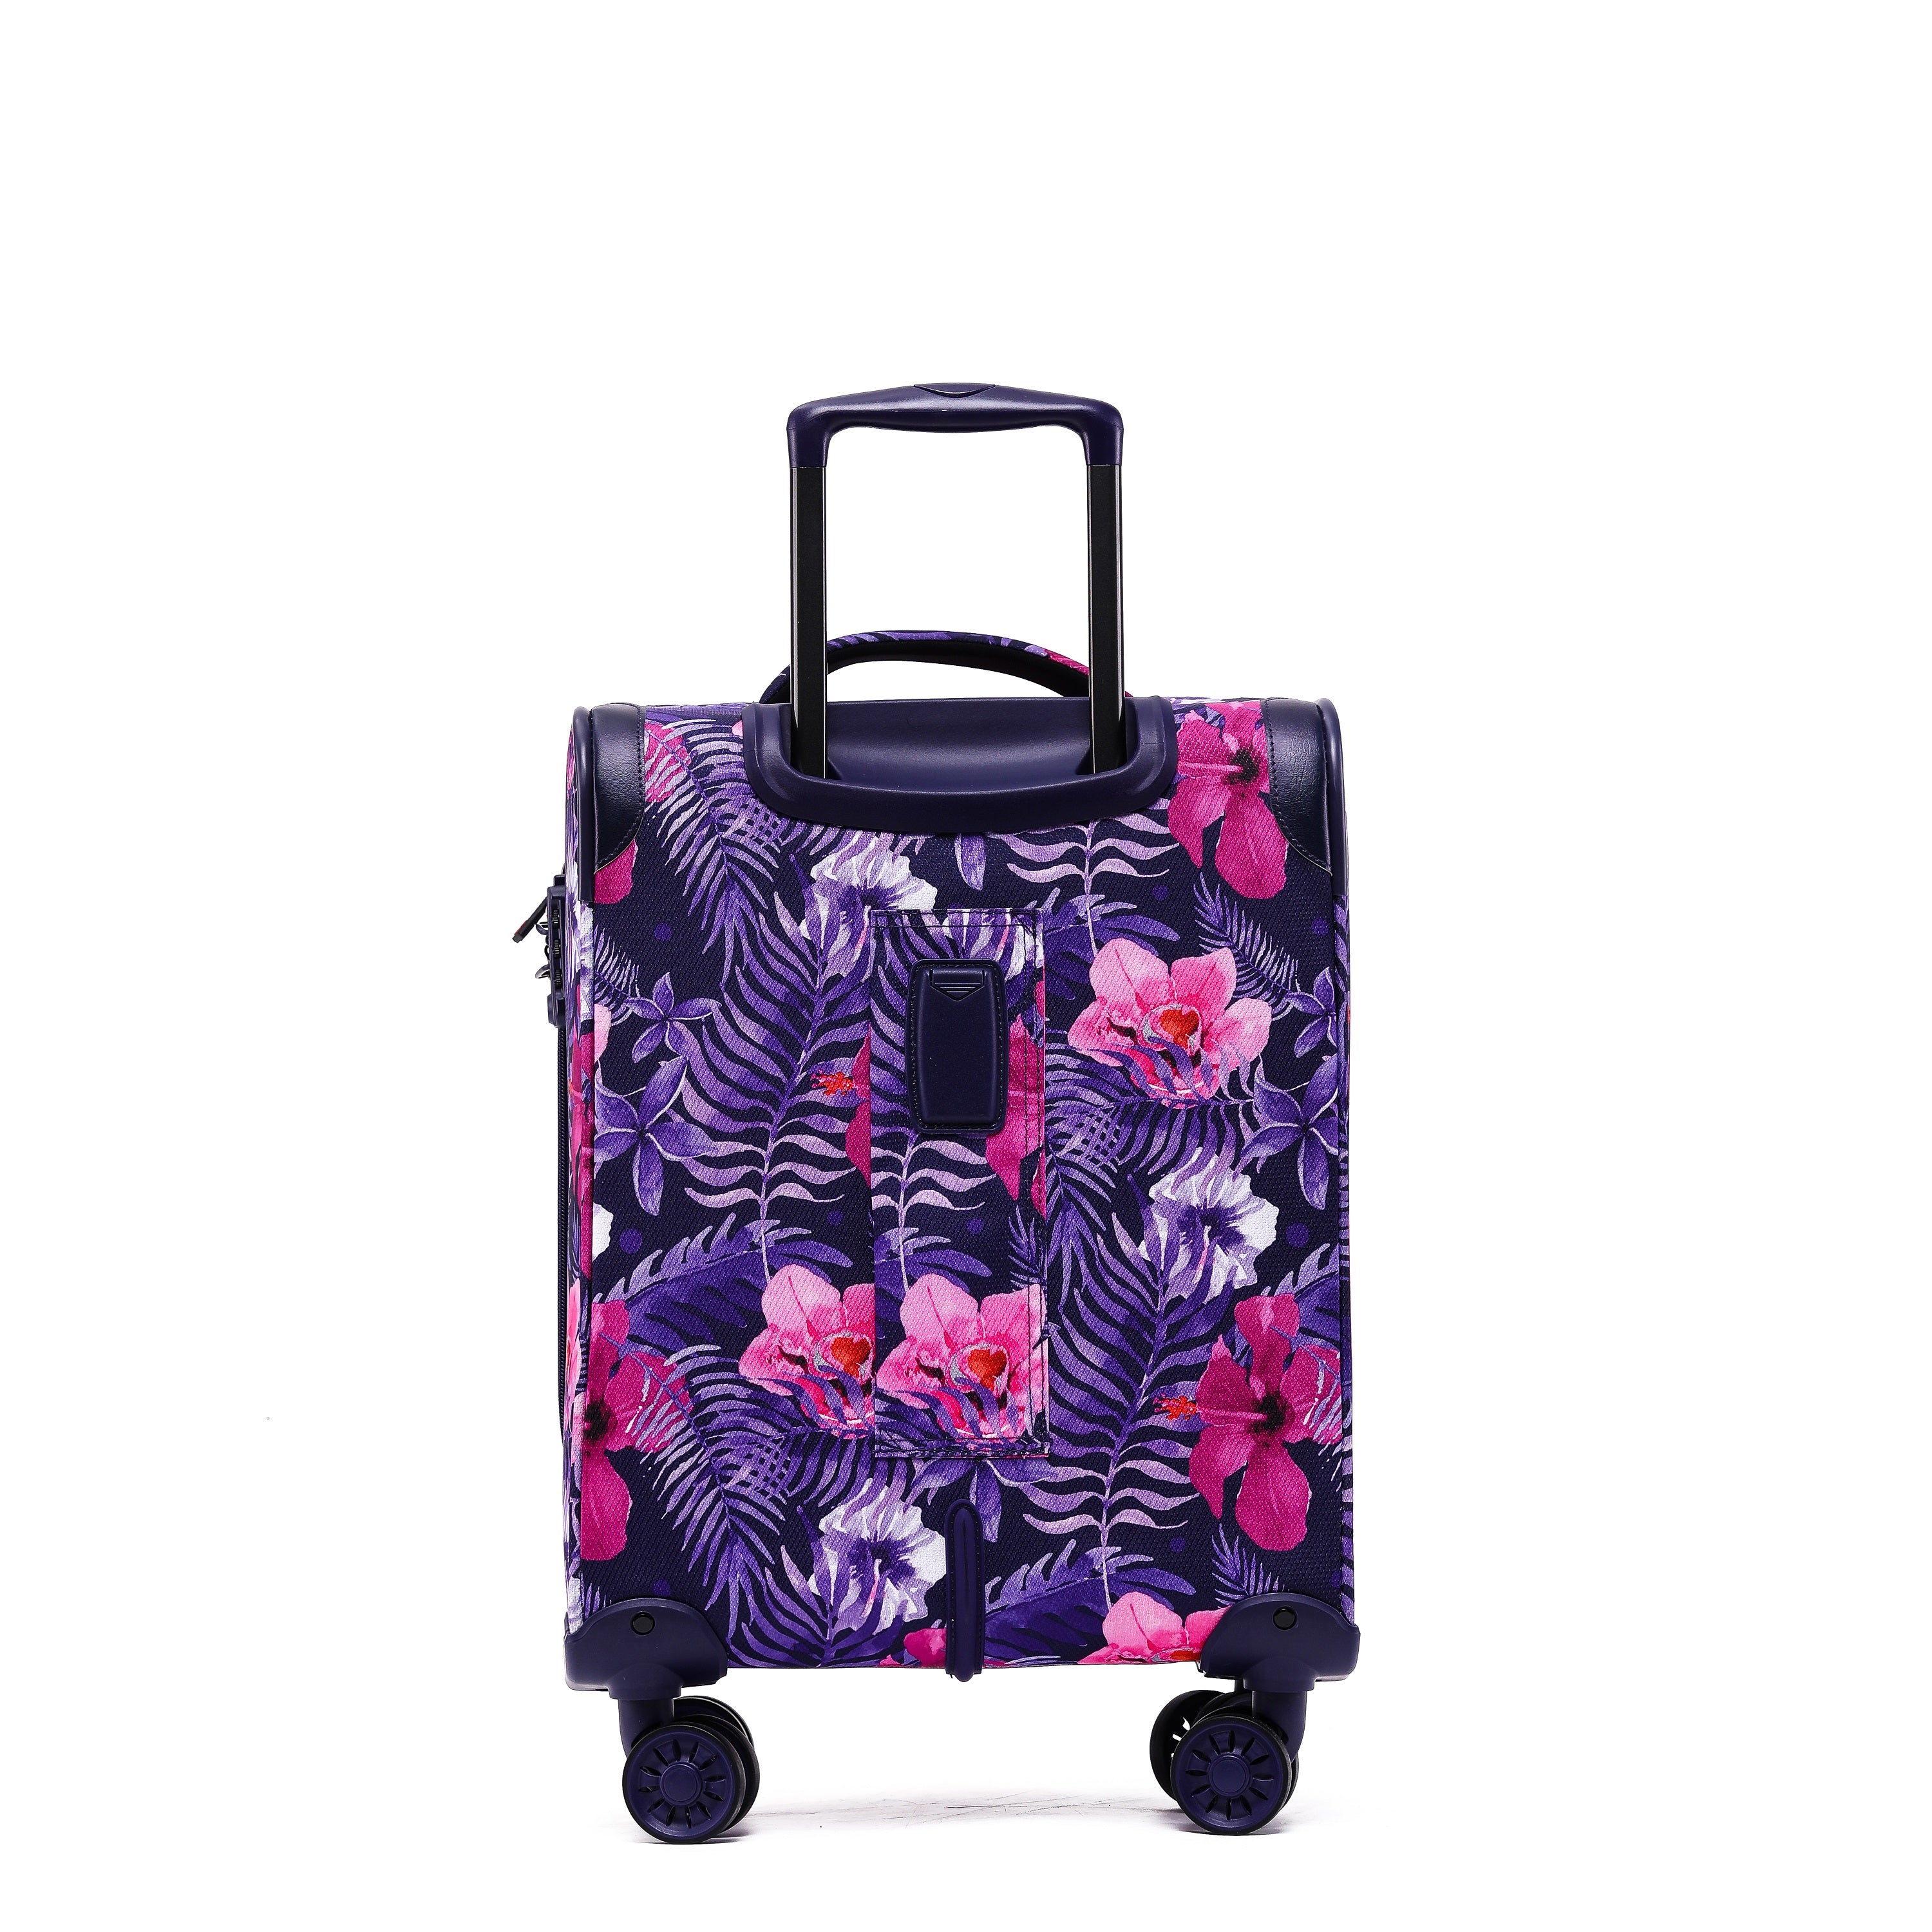 Tosca - So Lite 3.0 20in Small 4 Wheel Soft Suitcase - Flower - 0